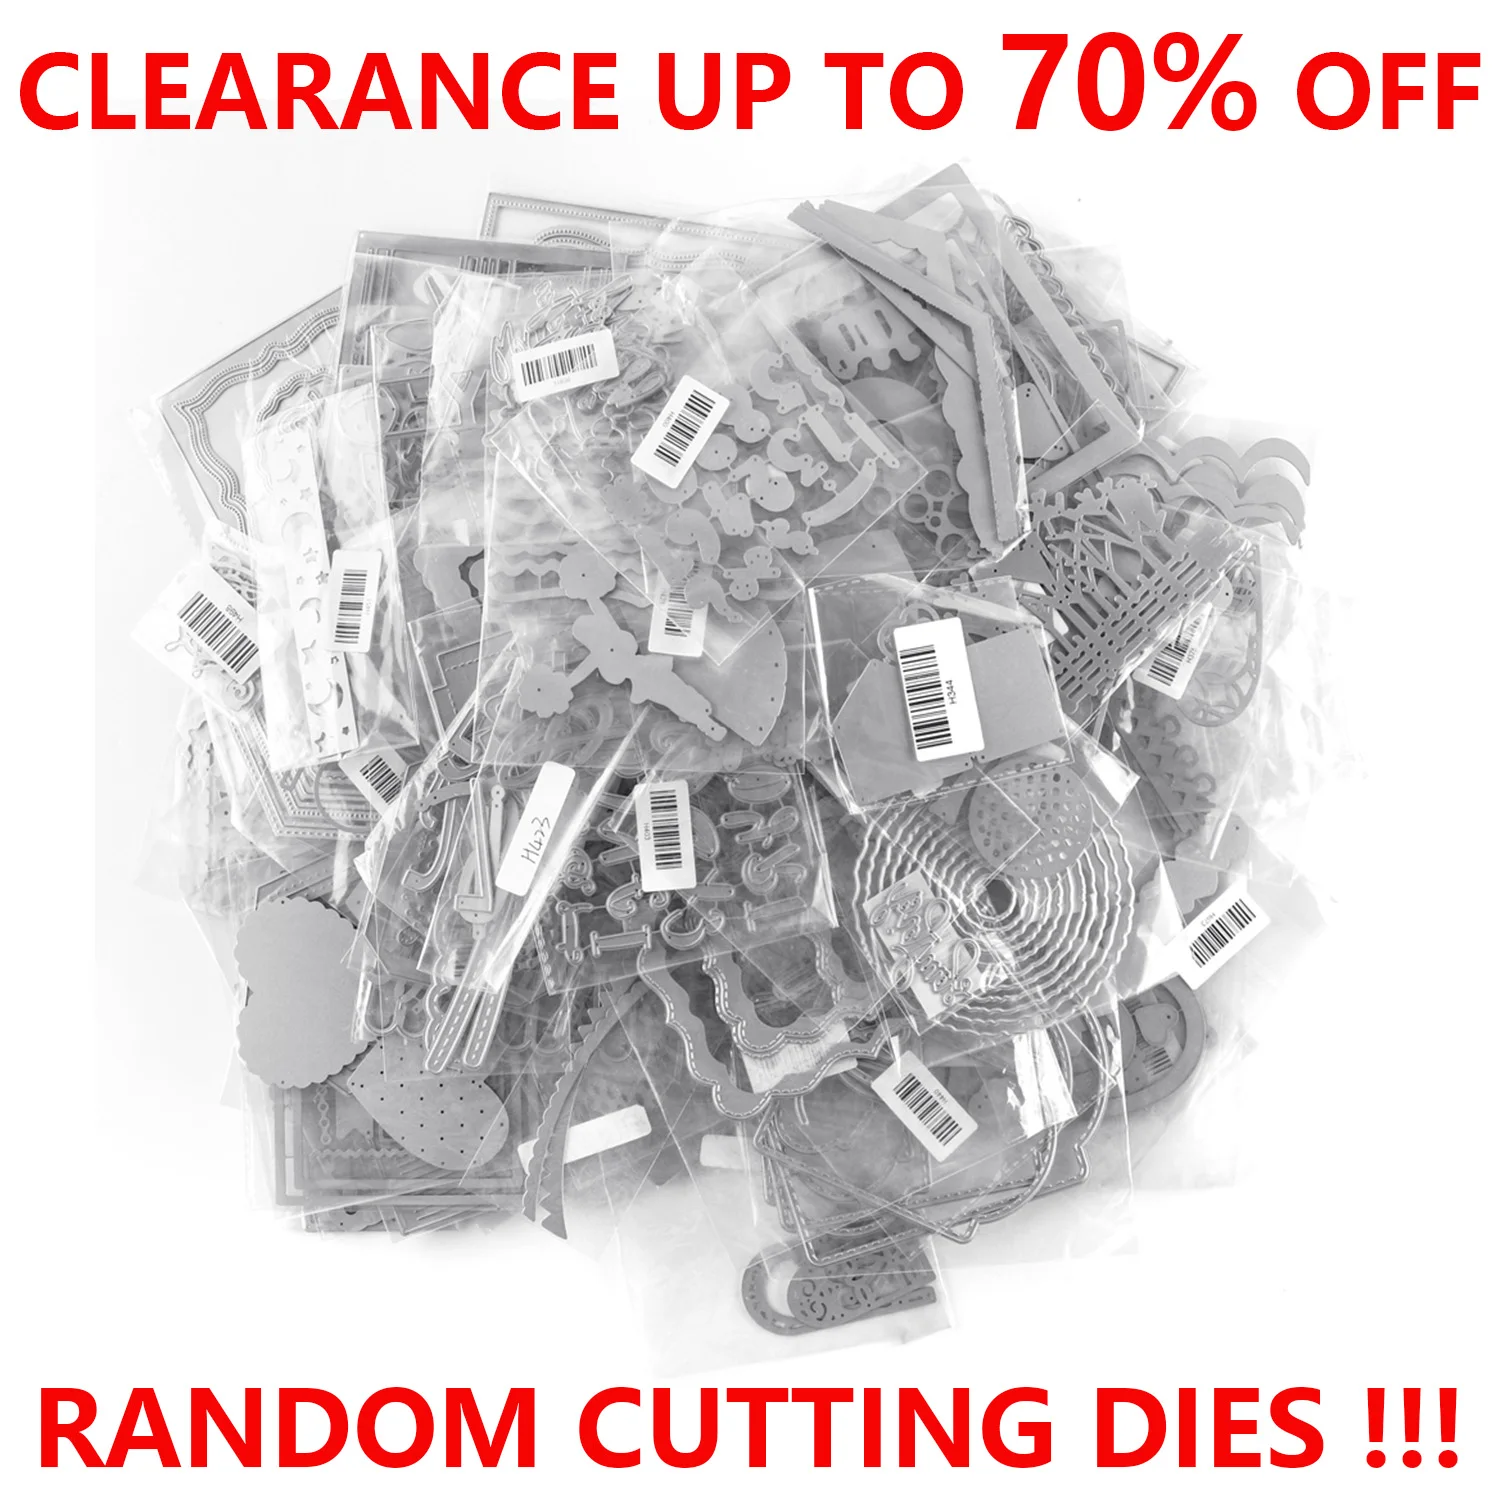 

10-50pcs Clearance Random Metal Cutting Dies for DIY Scrapbook Cards Lucky Bag Craft DieCuts Worth Twice or Triple What You Pay